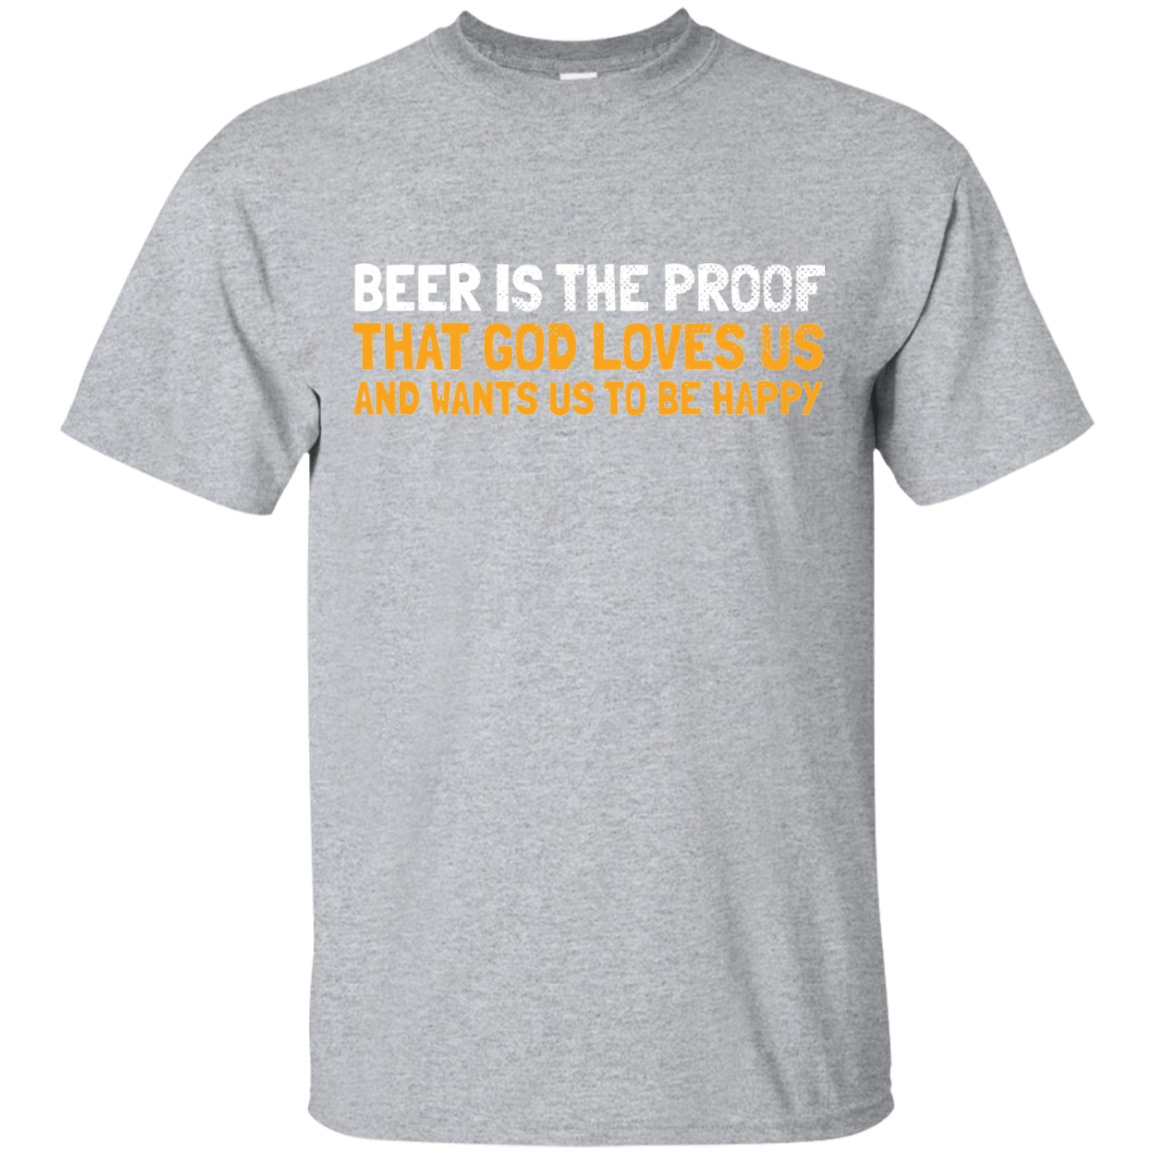 Beer Is The Proof T-Shirt Apparel - The Beer Lodge